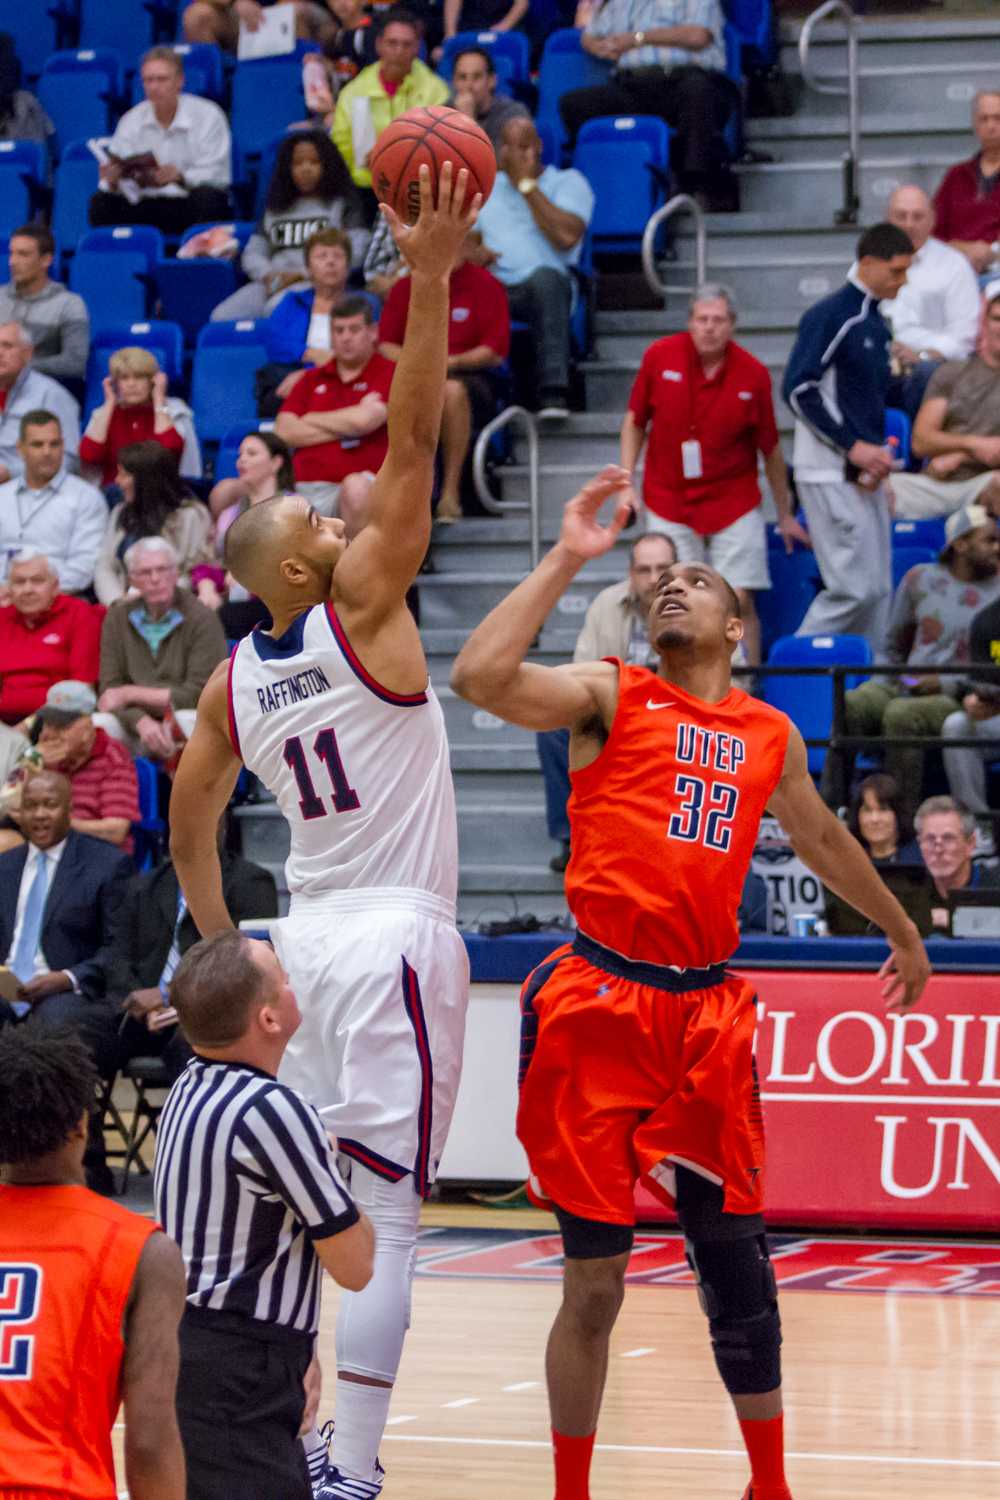 Raffington wins the tip-off over UTEP sophomore forward Vince Hunter. Hunter scored a team-leading 22 points on the night.